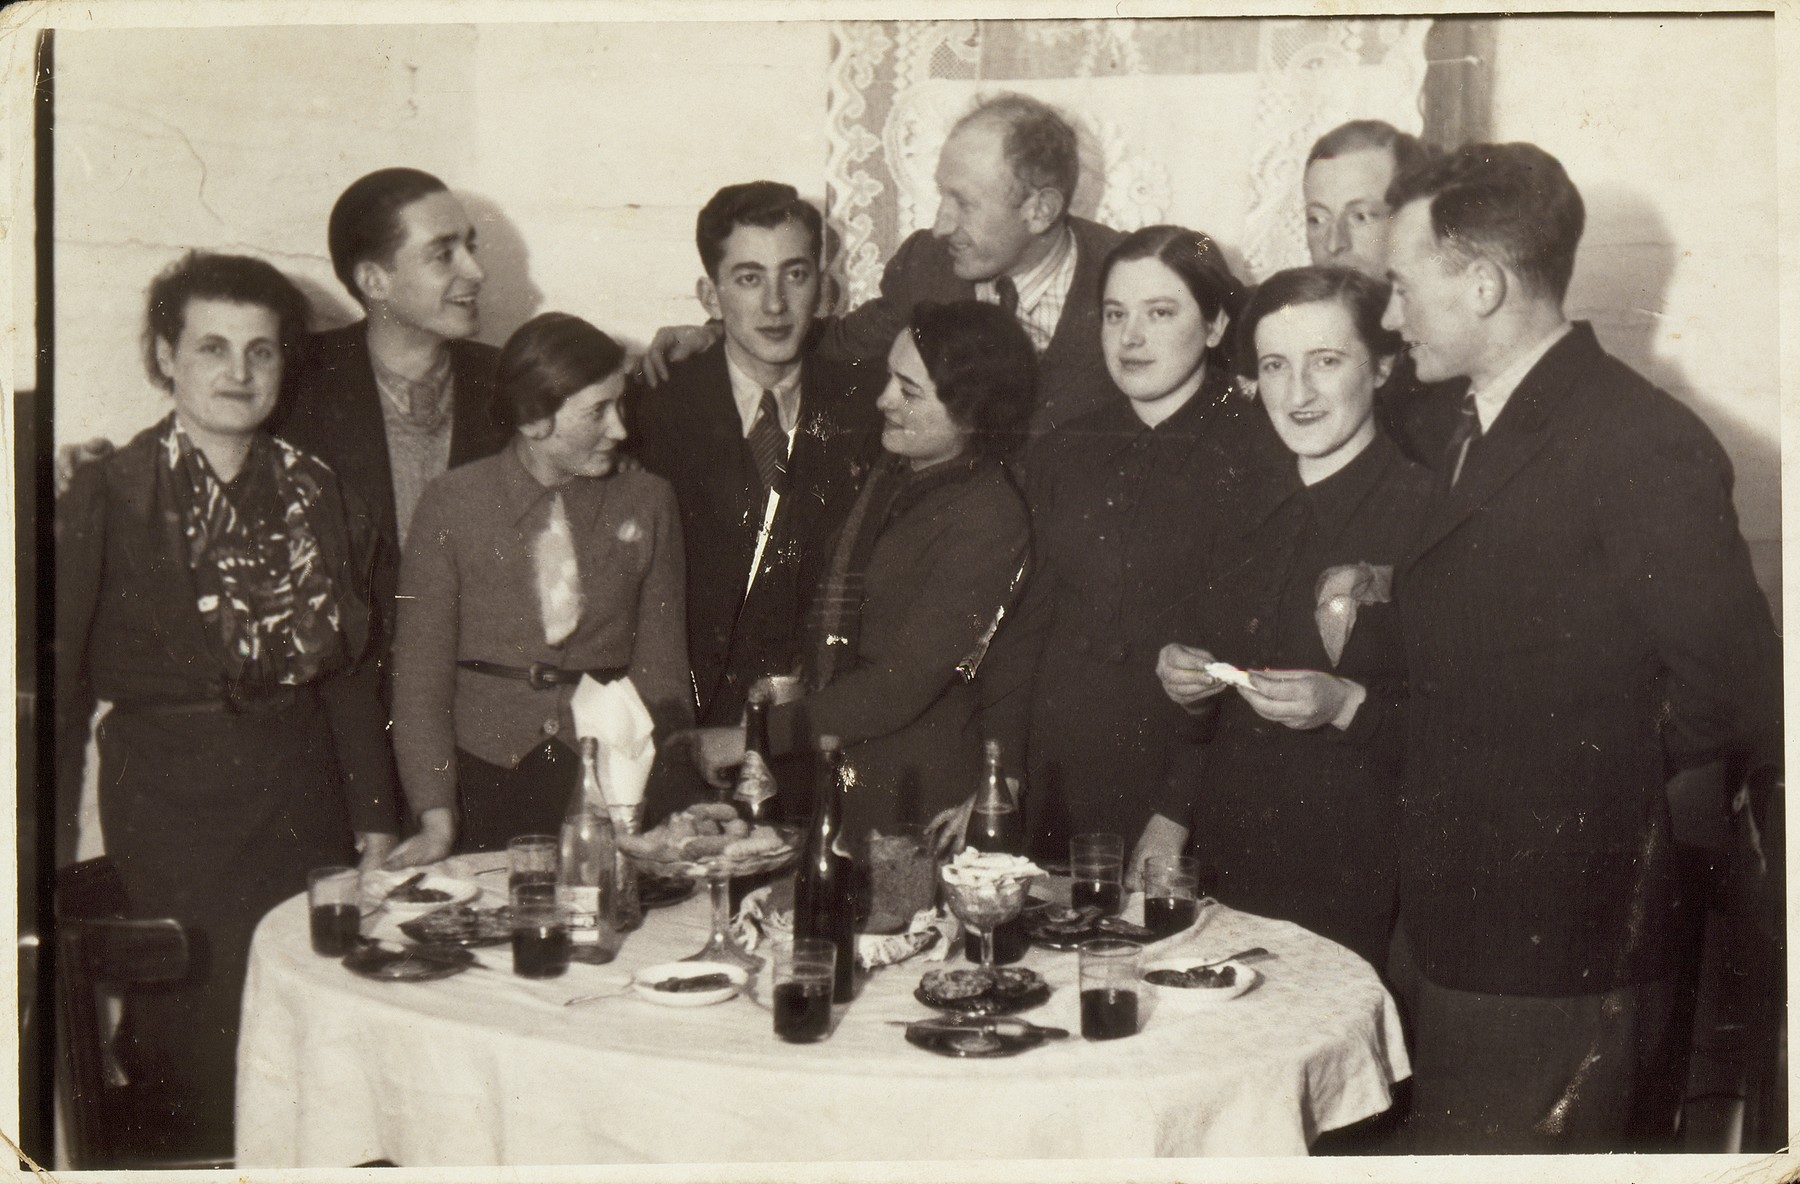 A Saturday night party at the home of Dina Weidenberg.

(right to left)  David Leib Levin; Miriam Kabacznik; her brother Shepske (in the back); Dina Weidenberg, Yehiel Blacharowicz; Kreinele Kanichowski; Dov Wolotzki;  Frumele Abelov, also a successful shopkeeper; an unidentified visitor; and Sarah Lejbowicz, sister of photographer Rephael. 

David-Leib survived the war in the forest, and Miriam and Shepske in hiding.  Dov was liberated from Dachau.  Kreinele was killed by members of the AK, including Pietka Barteszewicz, the caretaker of the Polish school where Kreinele once studied. All the others were killed by the Germans during the September 1941 mass shooting action in Eisiskes.